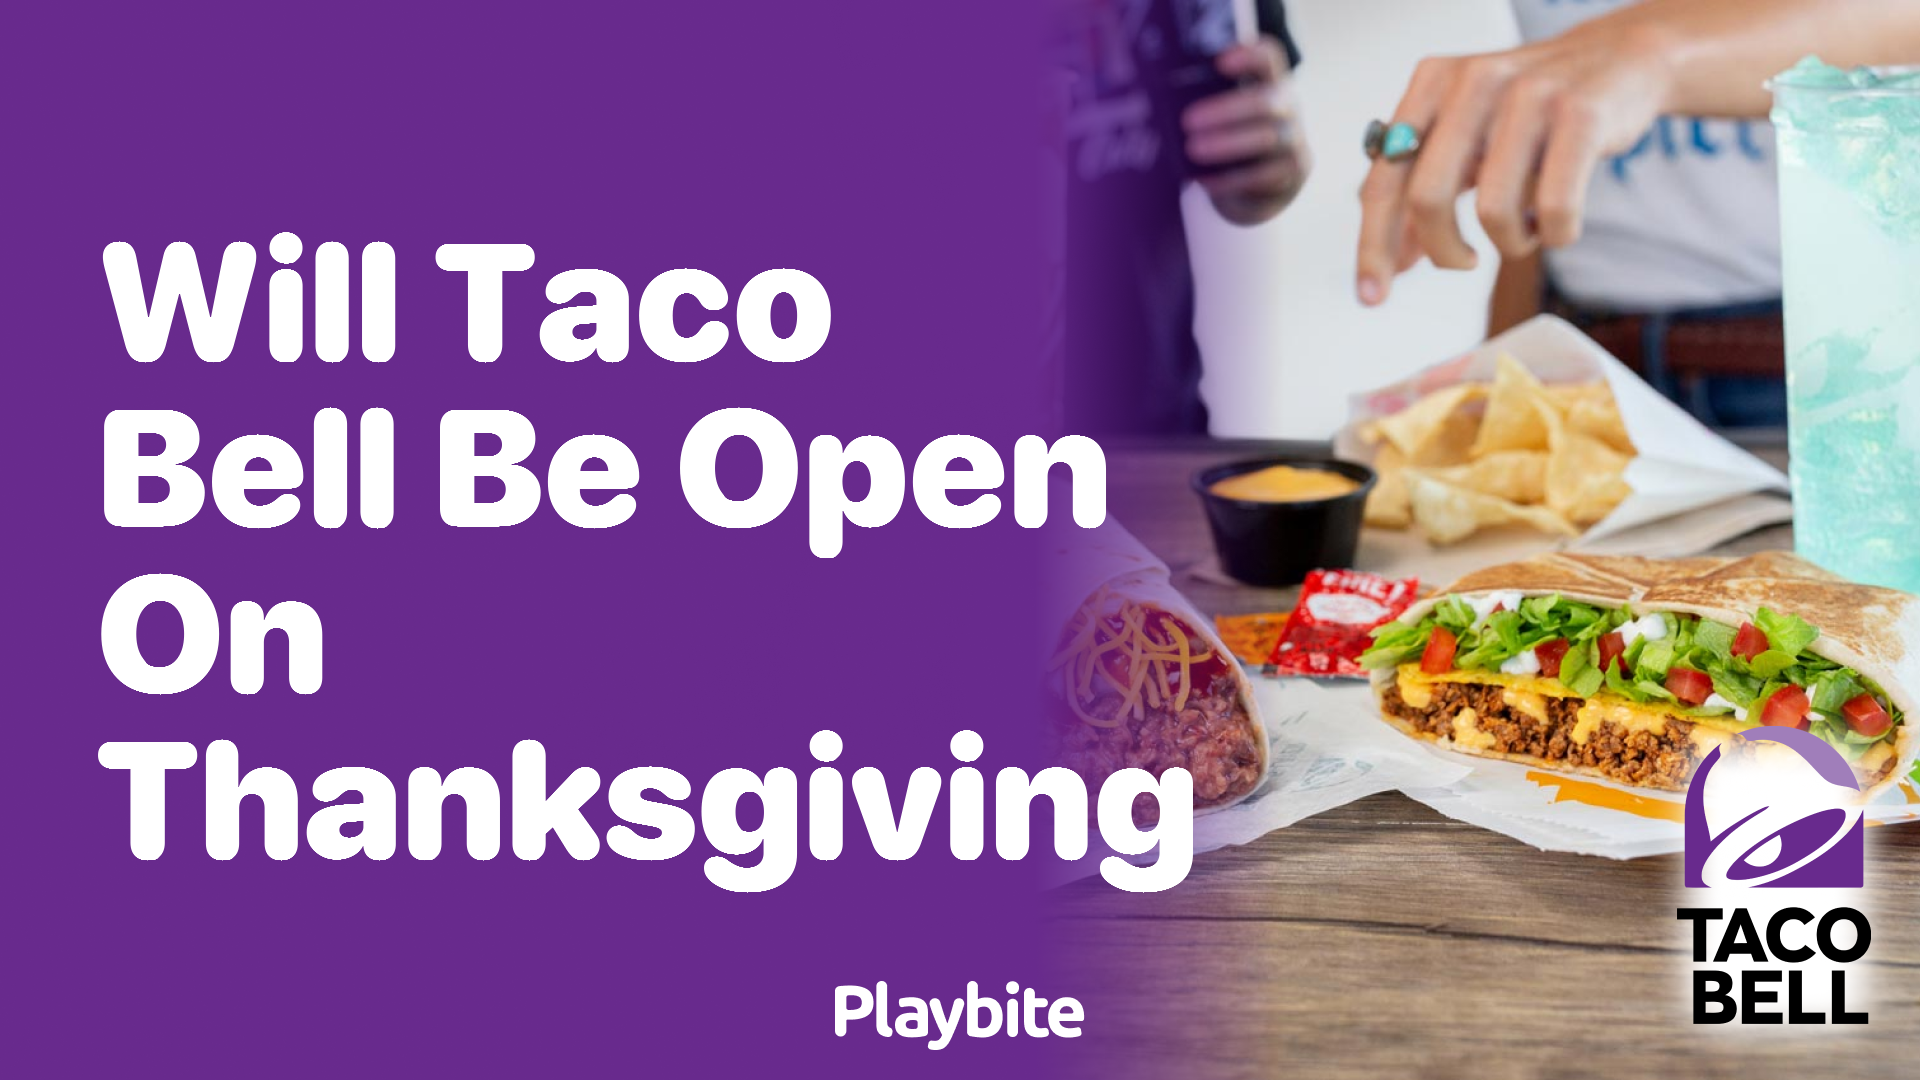 Will Taco Bell Be Open on Thanksgiving? Find Out Here!